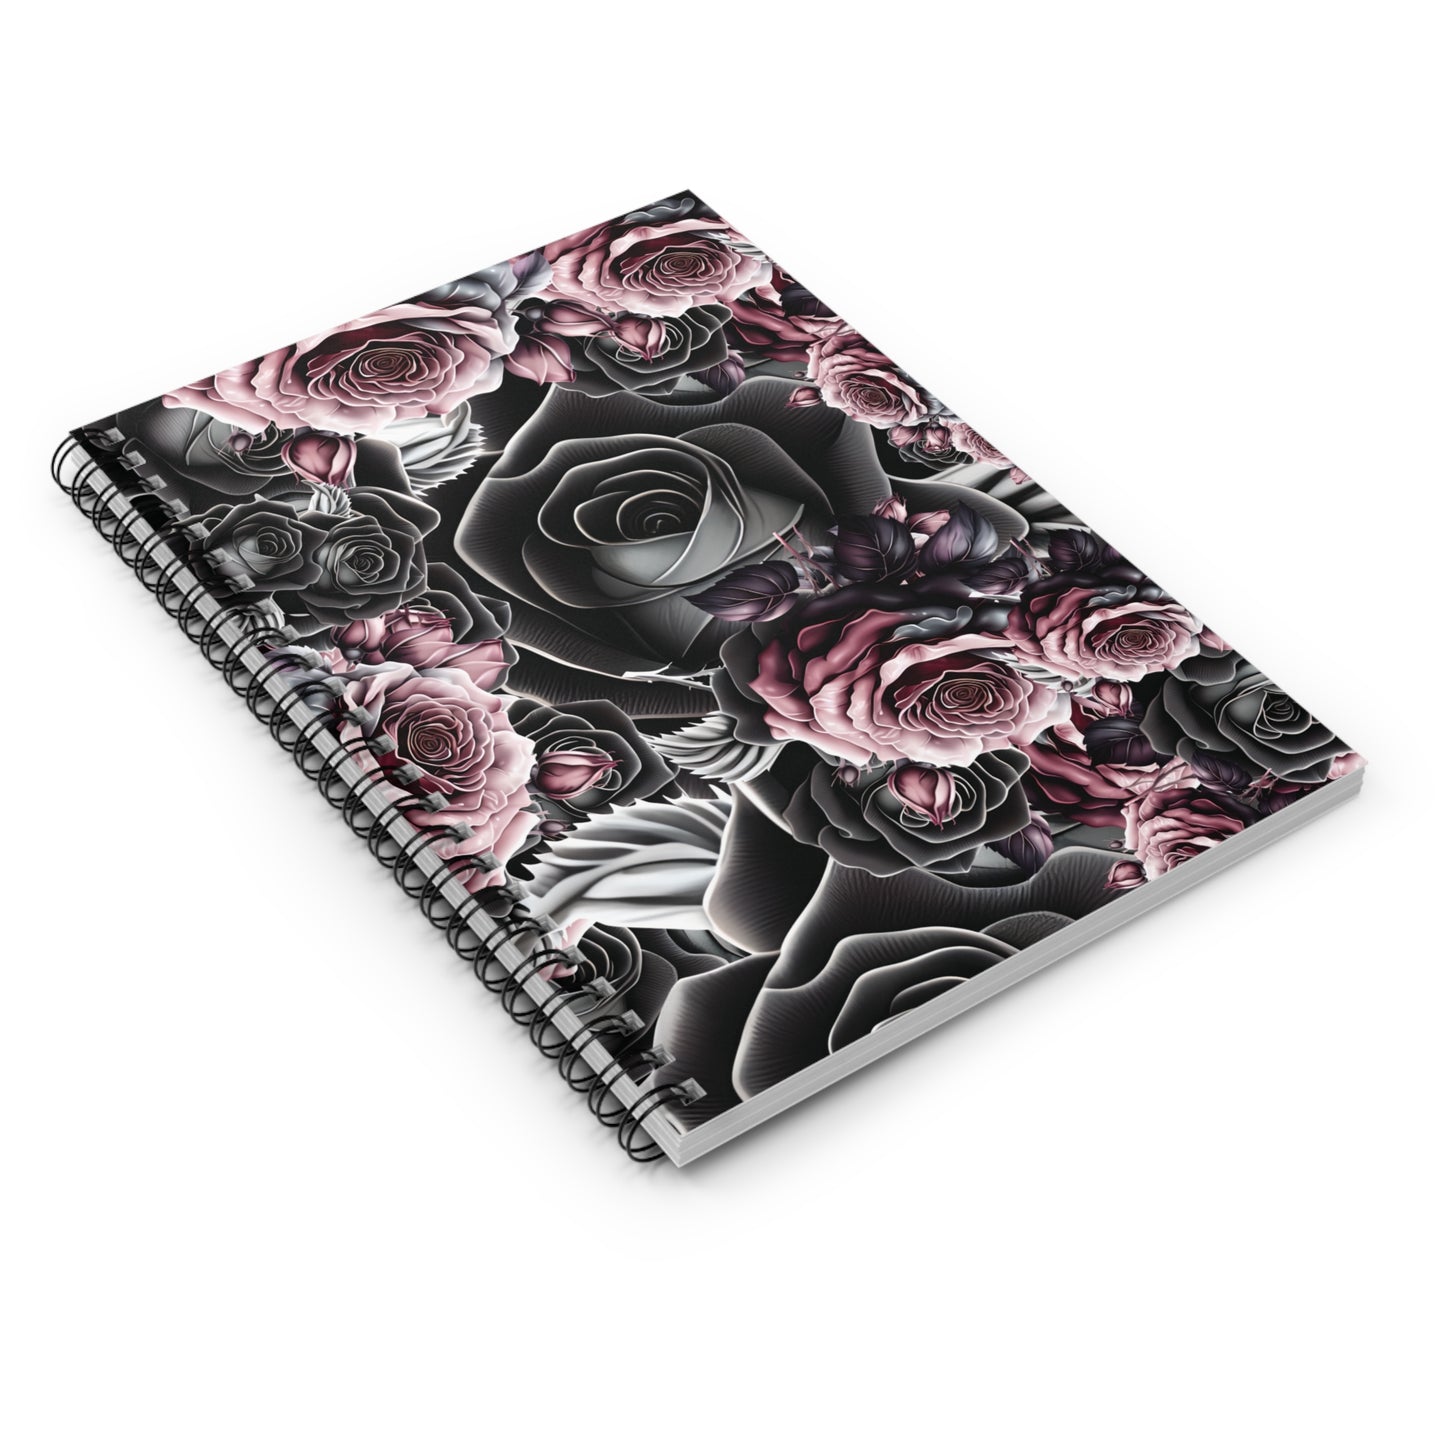 Black Rose: Spiral Notebook - Log Books - Journals - Diaries - and More Custom Printed by TheGlassyLass